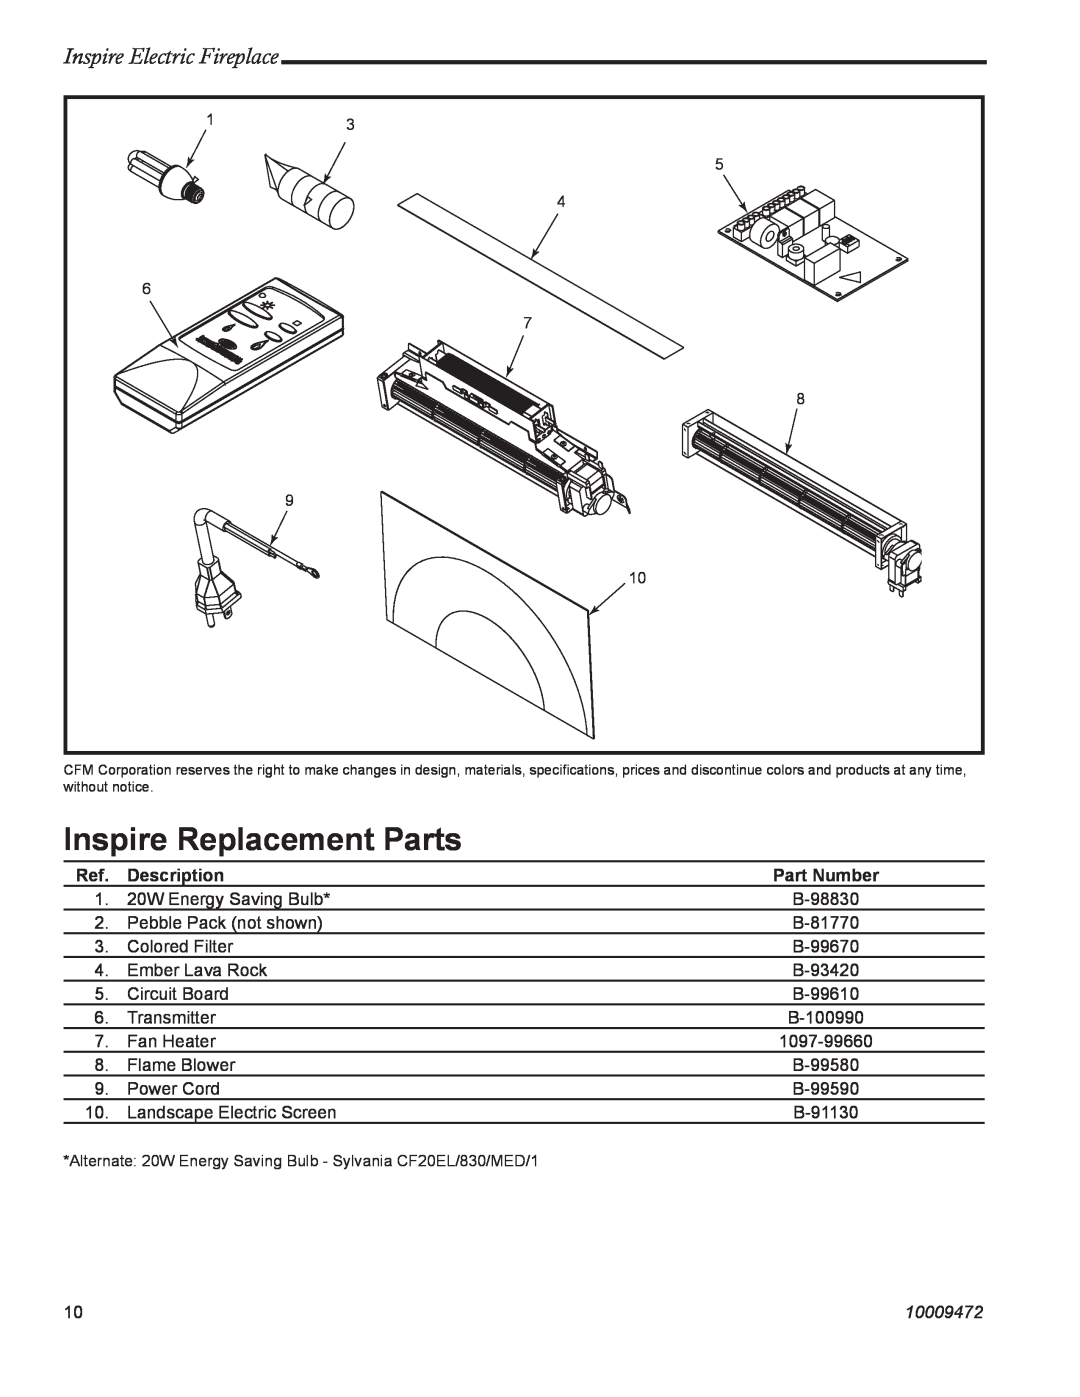 Vermont Casting ICVCTK02 manual Inspire Replacement Parts, Inspire Electric Fireplace, Description, Part Number, 10009472 